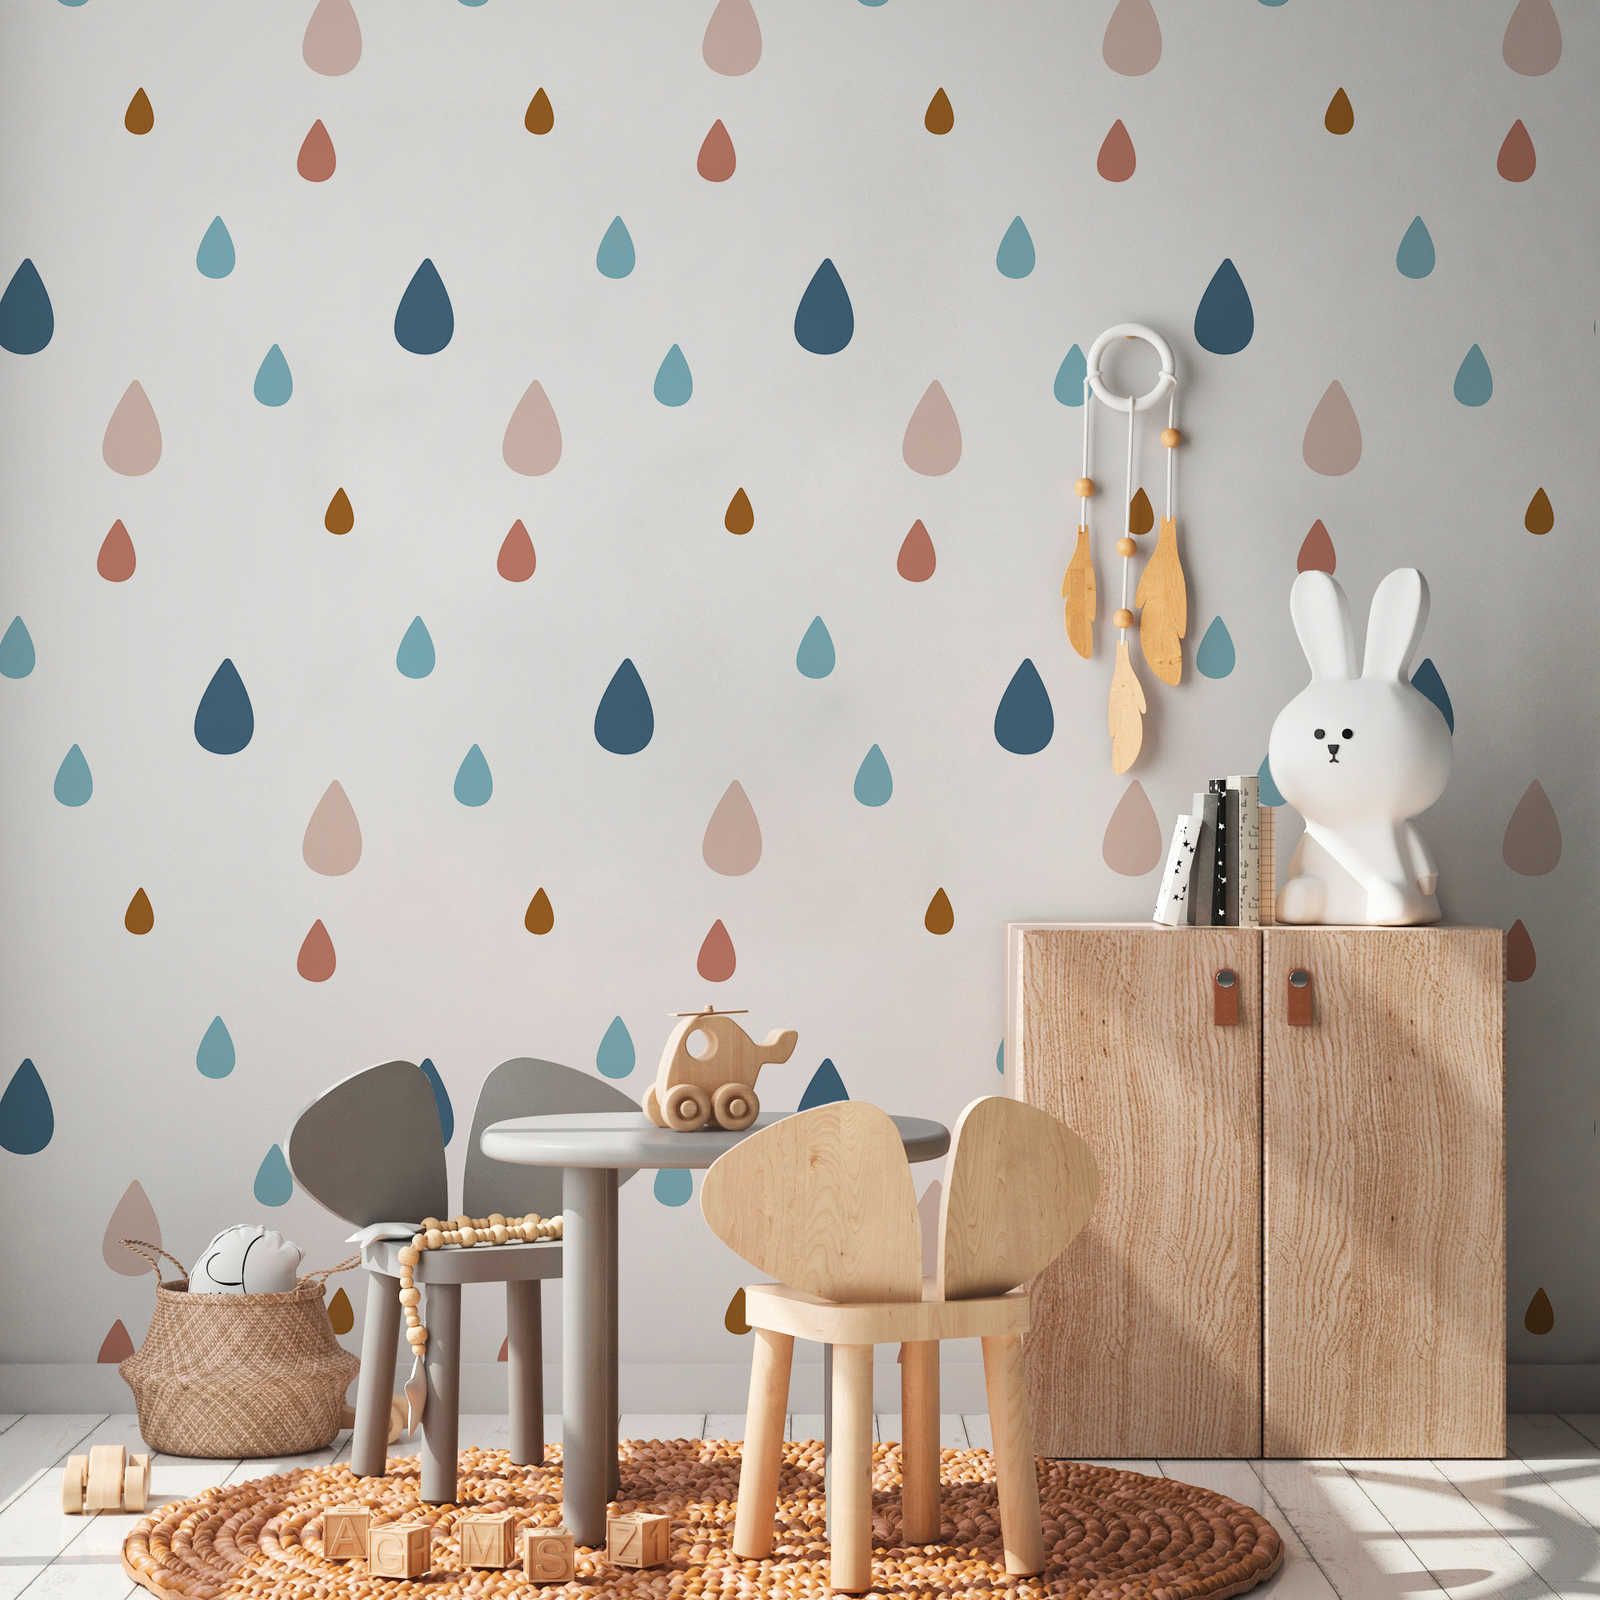         Photo wallpaper for children's room with colourful water drops - Smooth & slightly shiny non-woven
    